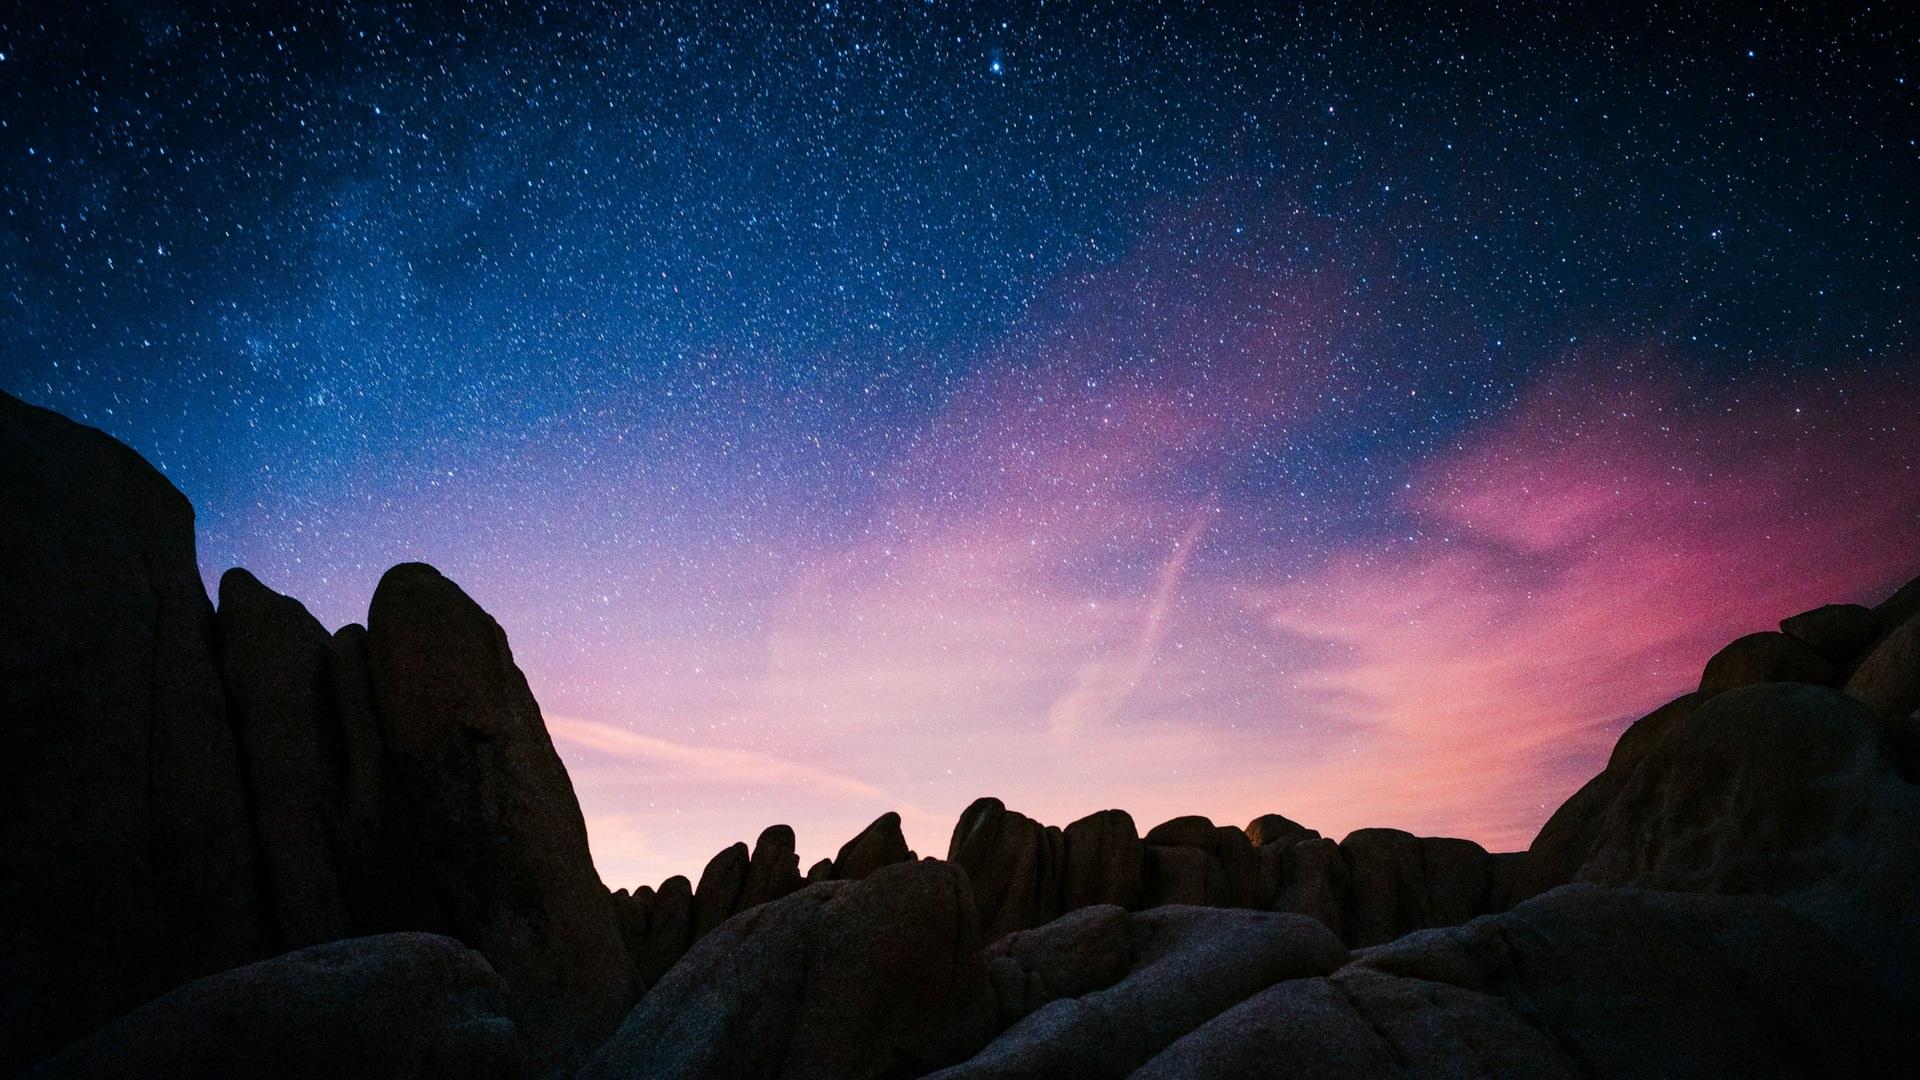 The sky full of stars with blue and pink hues over the rock